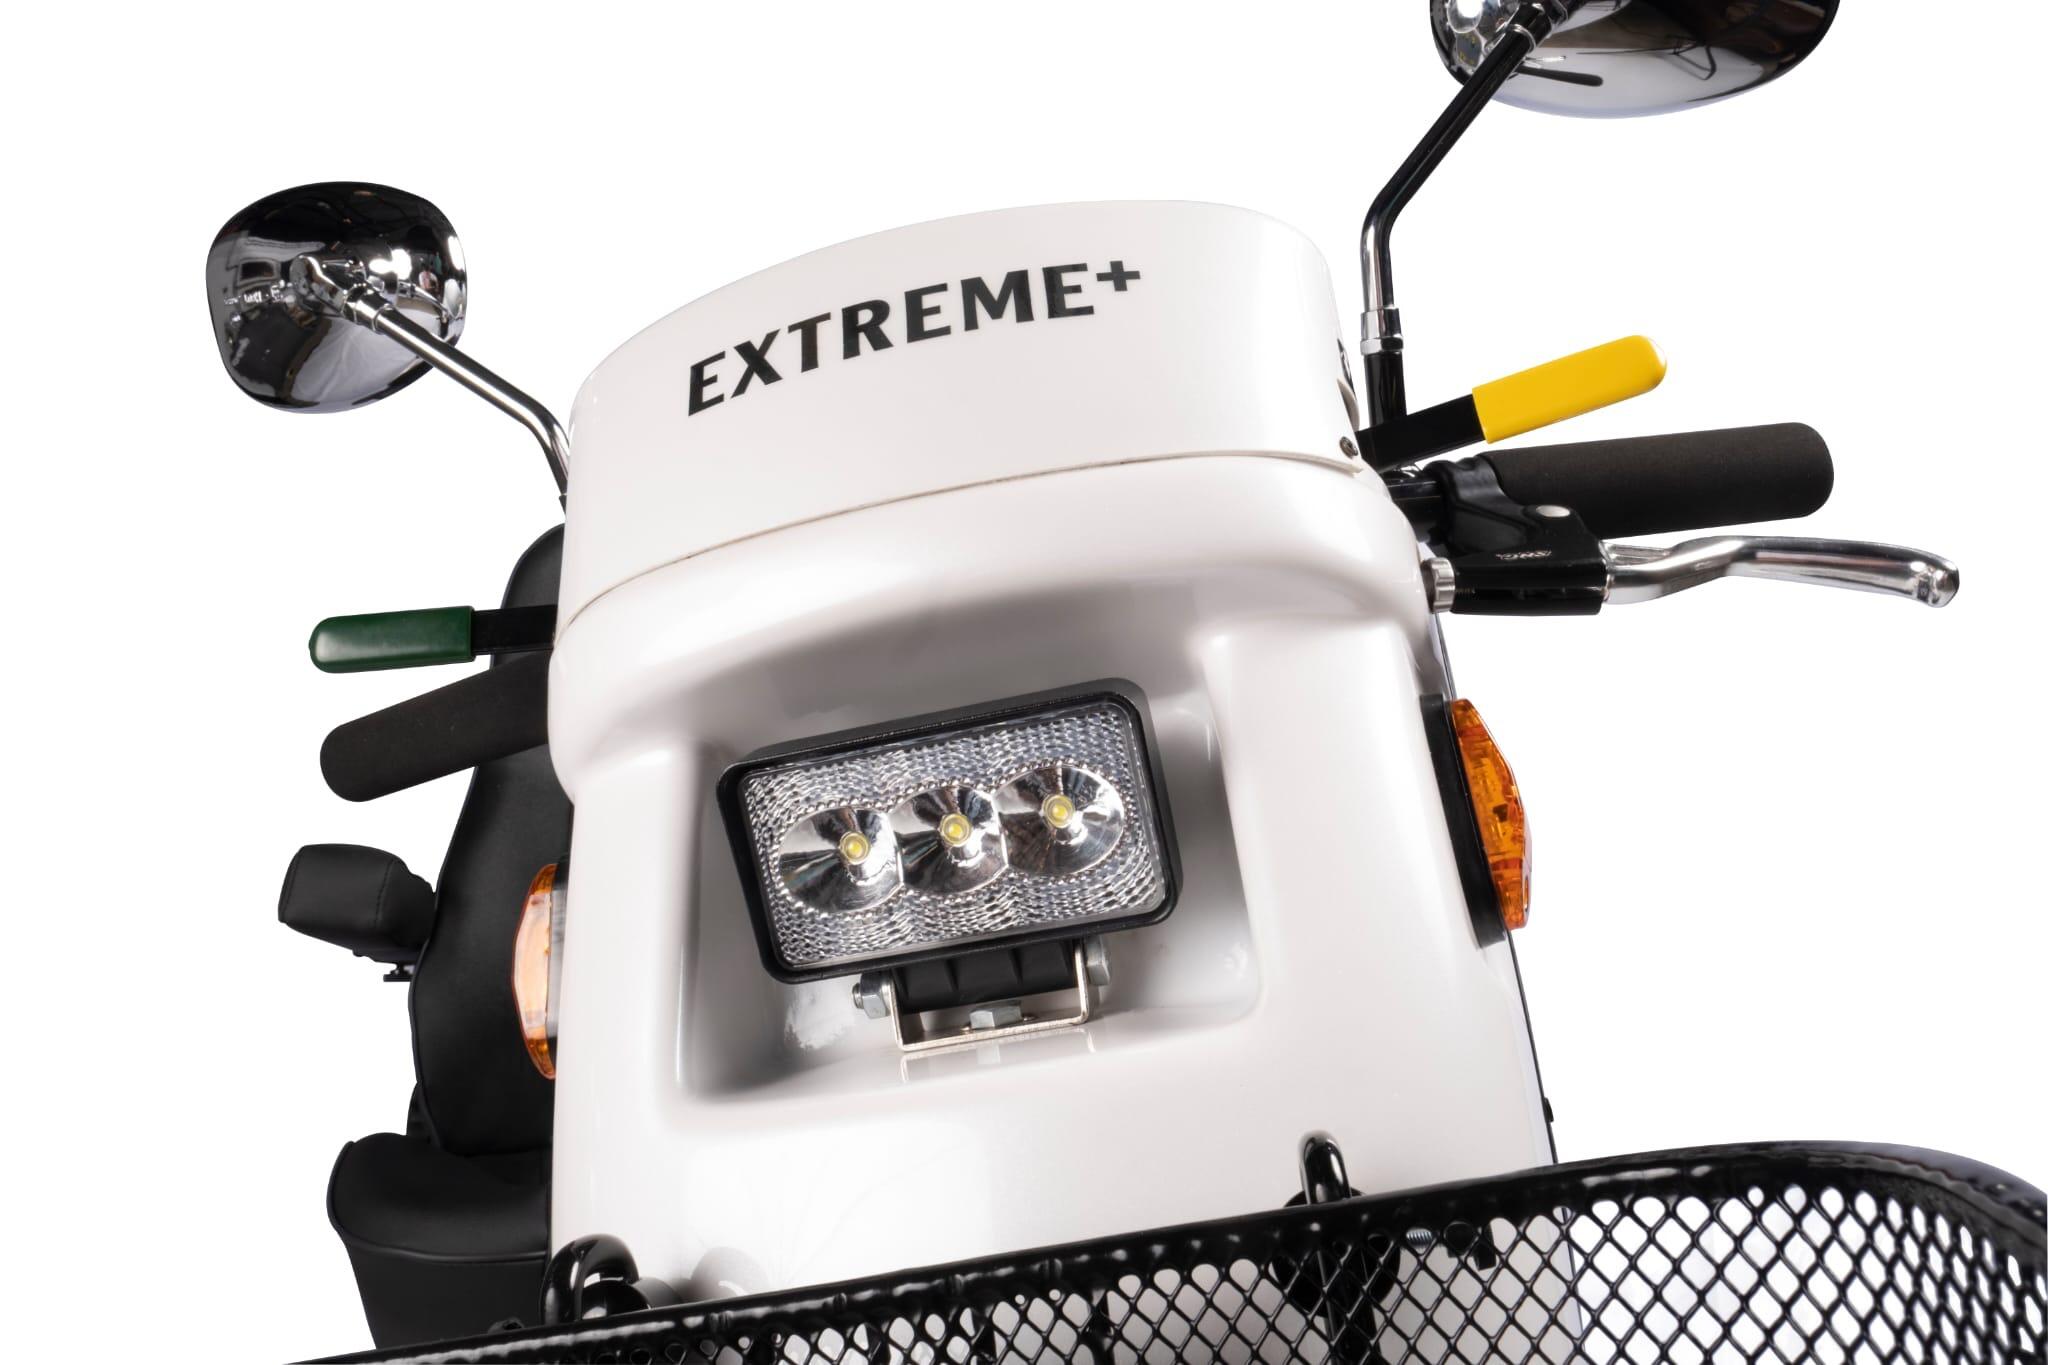 Extreme plus powerful mobility scooter ultra bright LED lights